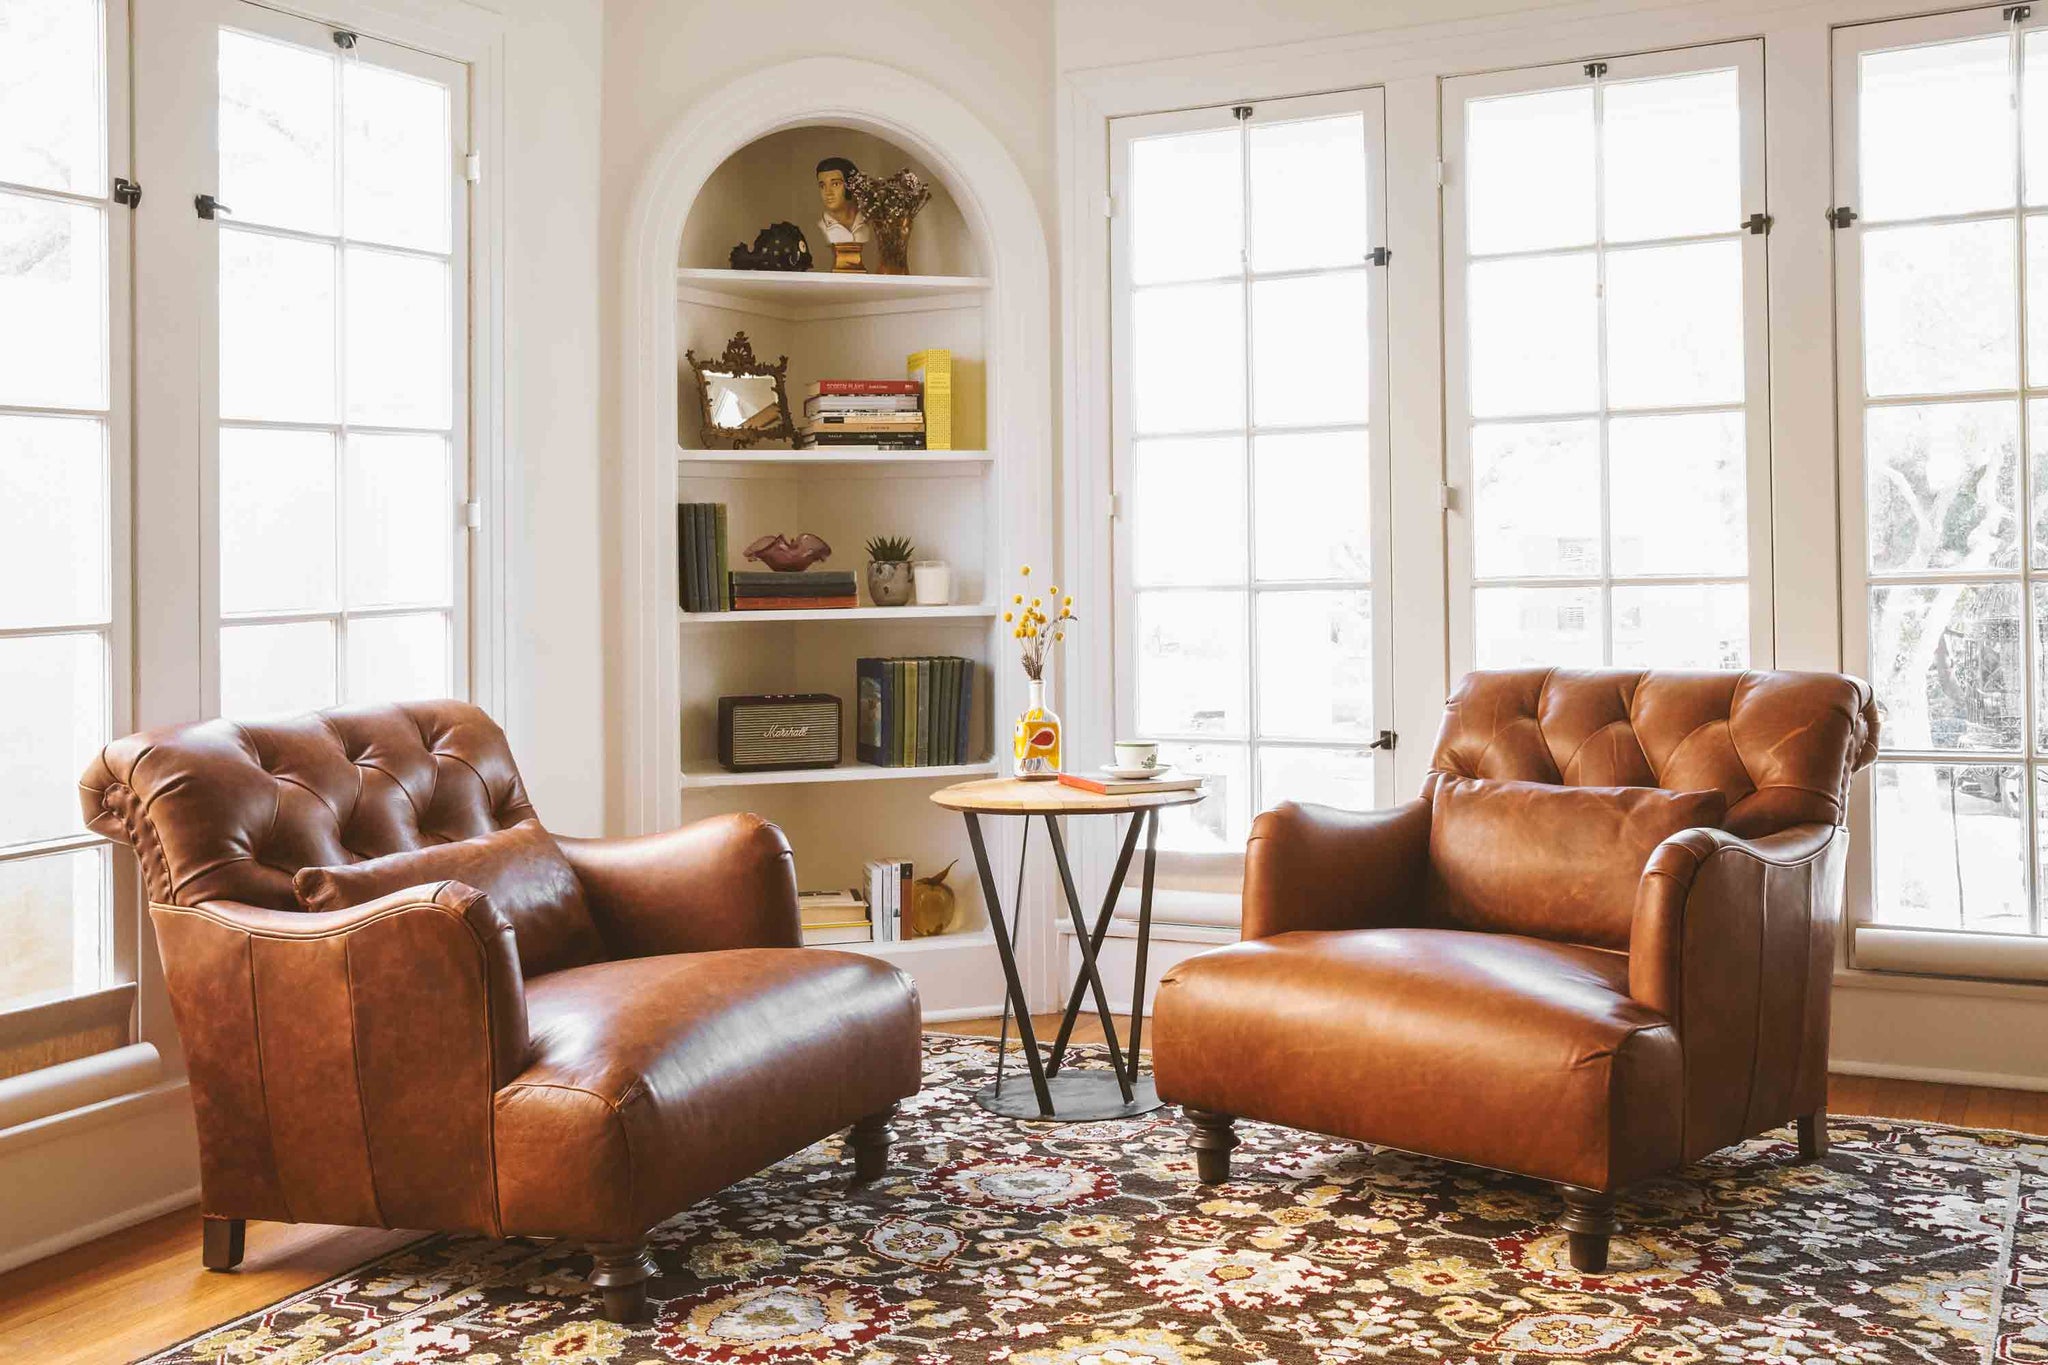  Leather chairs in Spur Terracotta in a white room sitting in front of large windows. Photographed in Spur Terracotta. 